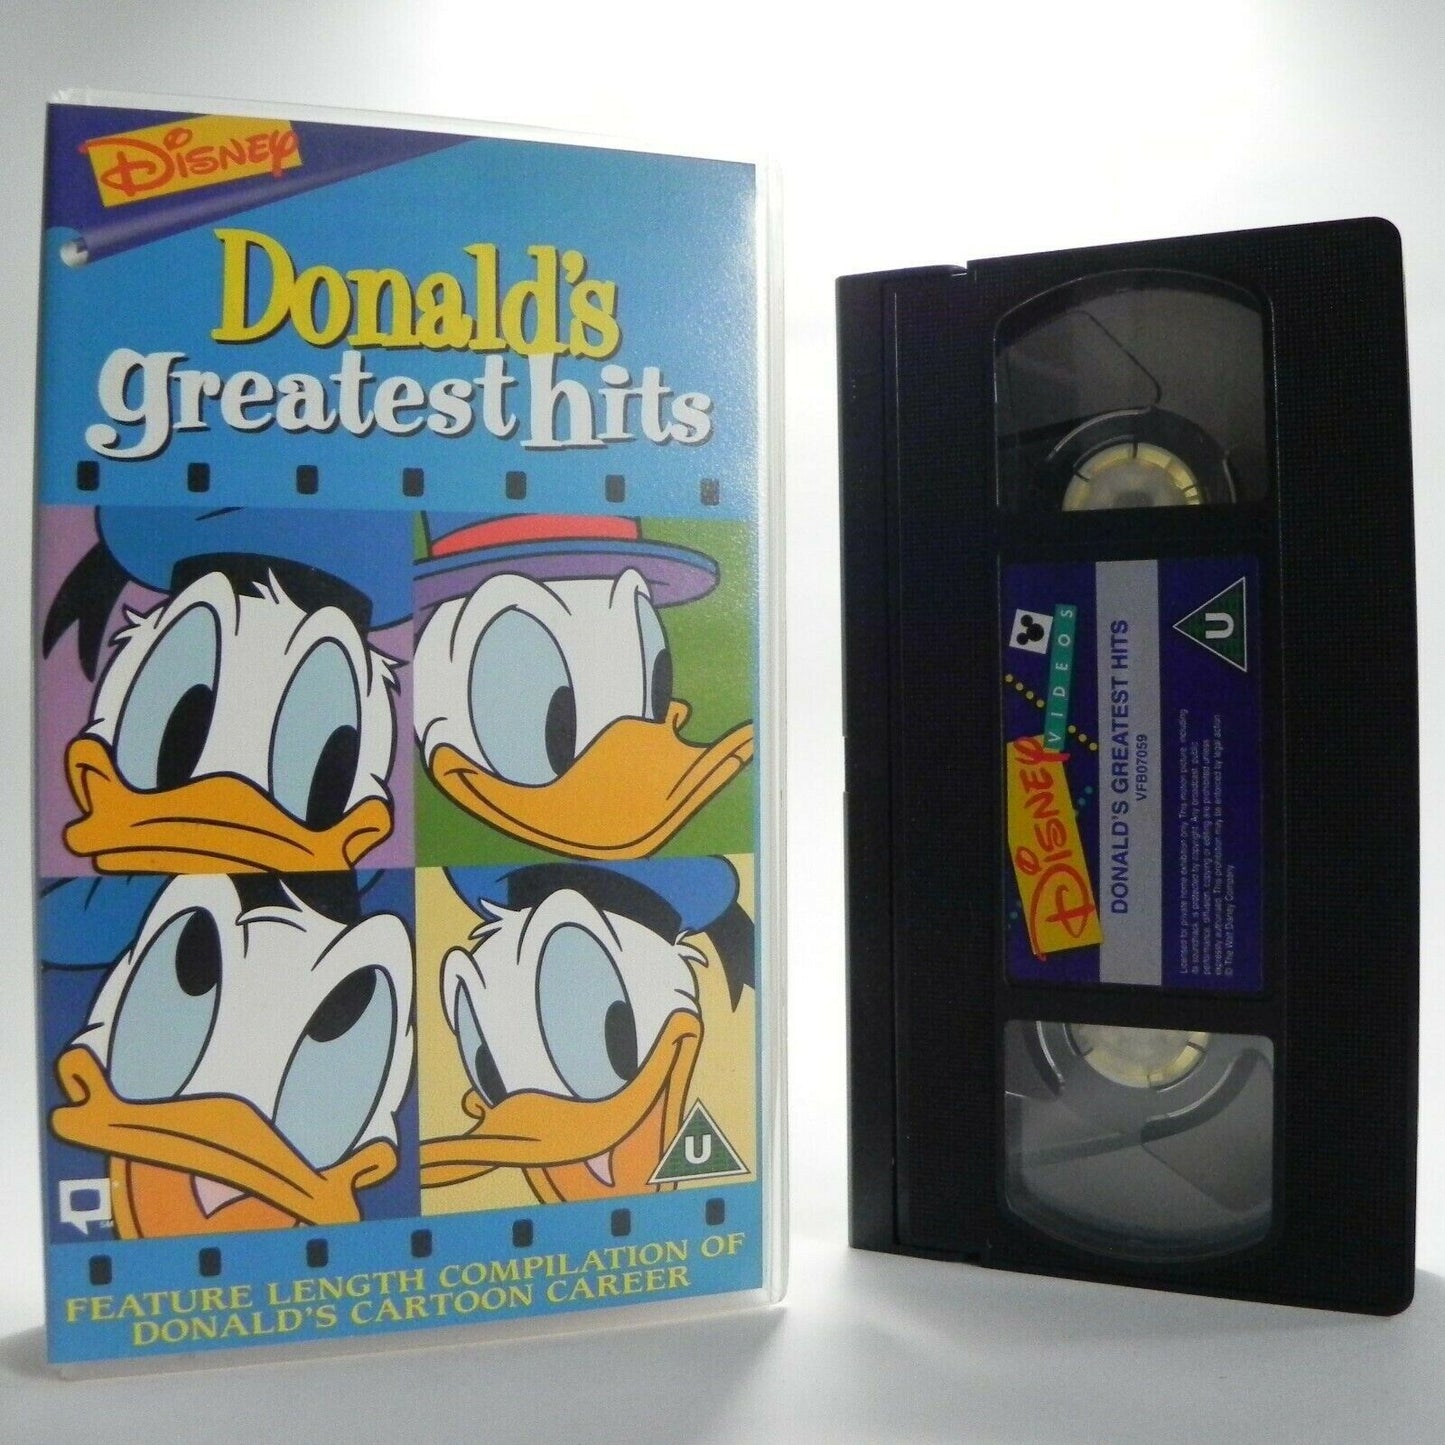 Donald Duck At Home Cartoon Porn - Donald Duck, Greatest Hits, Disney, Animation, Childrens Compilation, VHS â€“  Golden Class Movies LTD